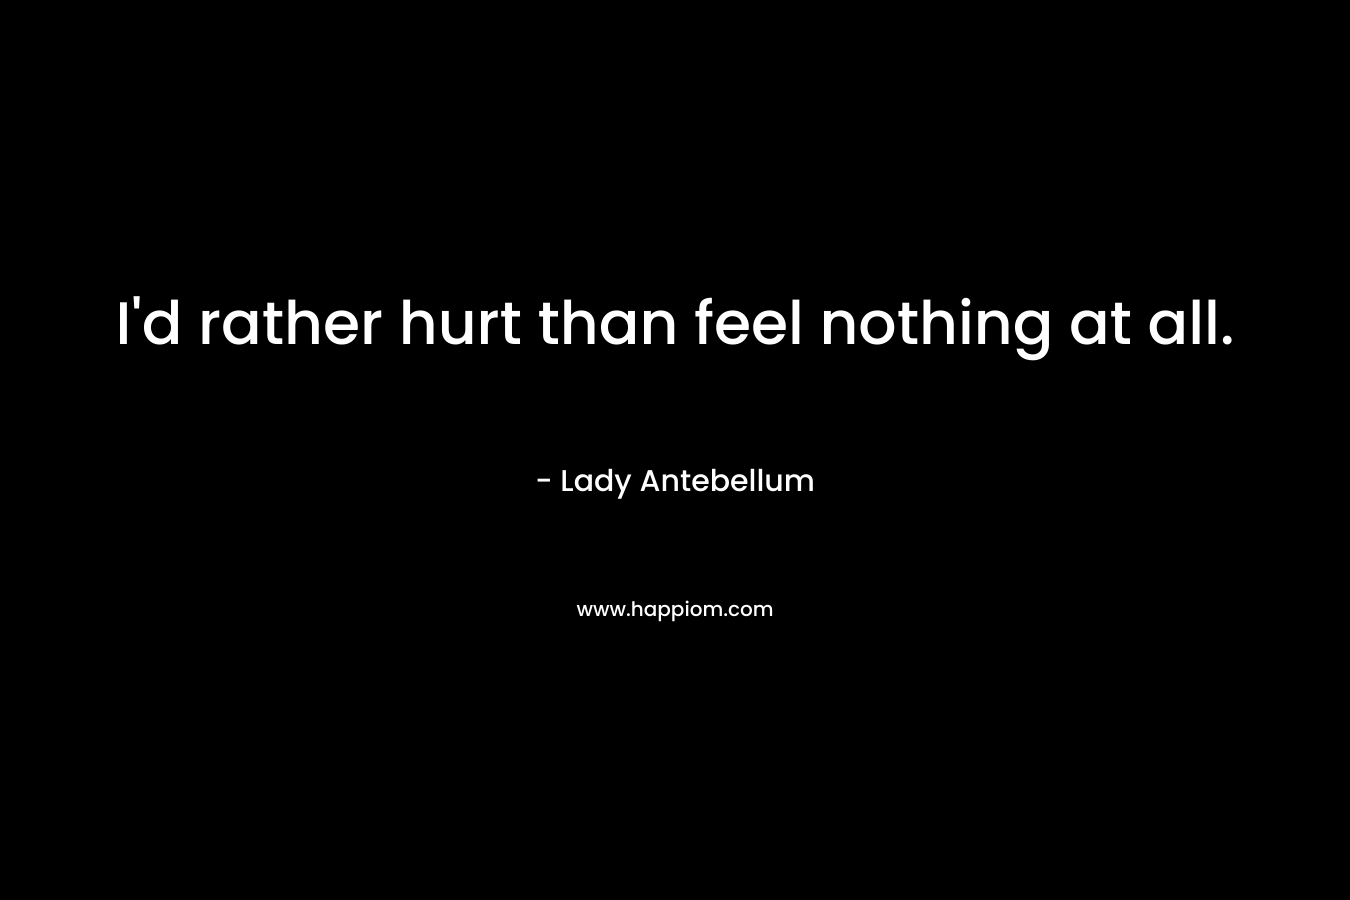 I’d rather hurt than feel nothing at all. – Lady Antebellum